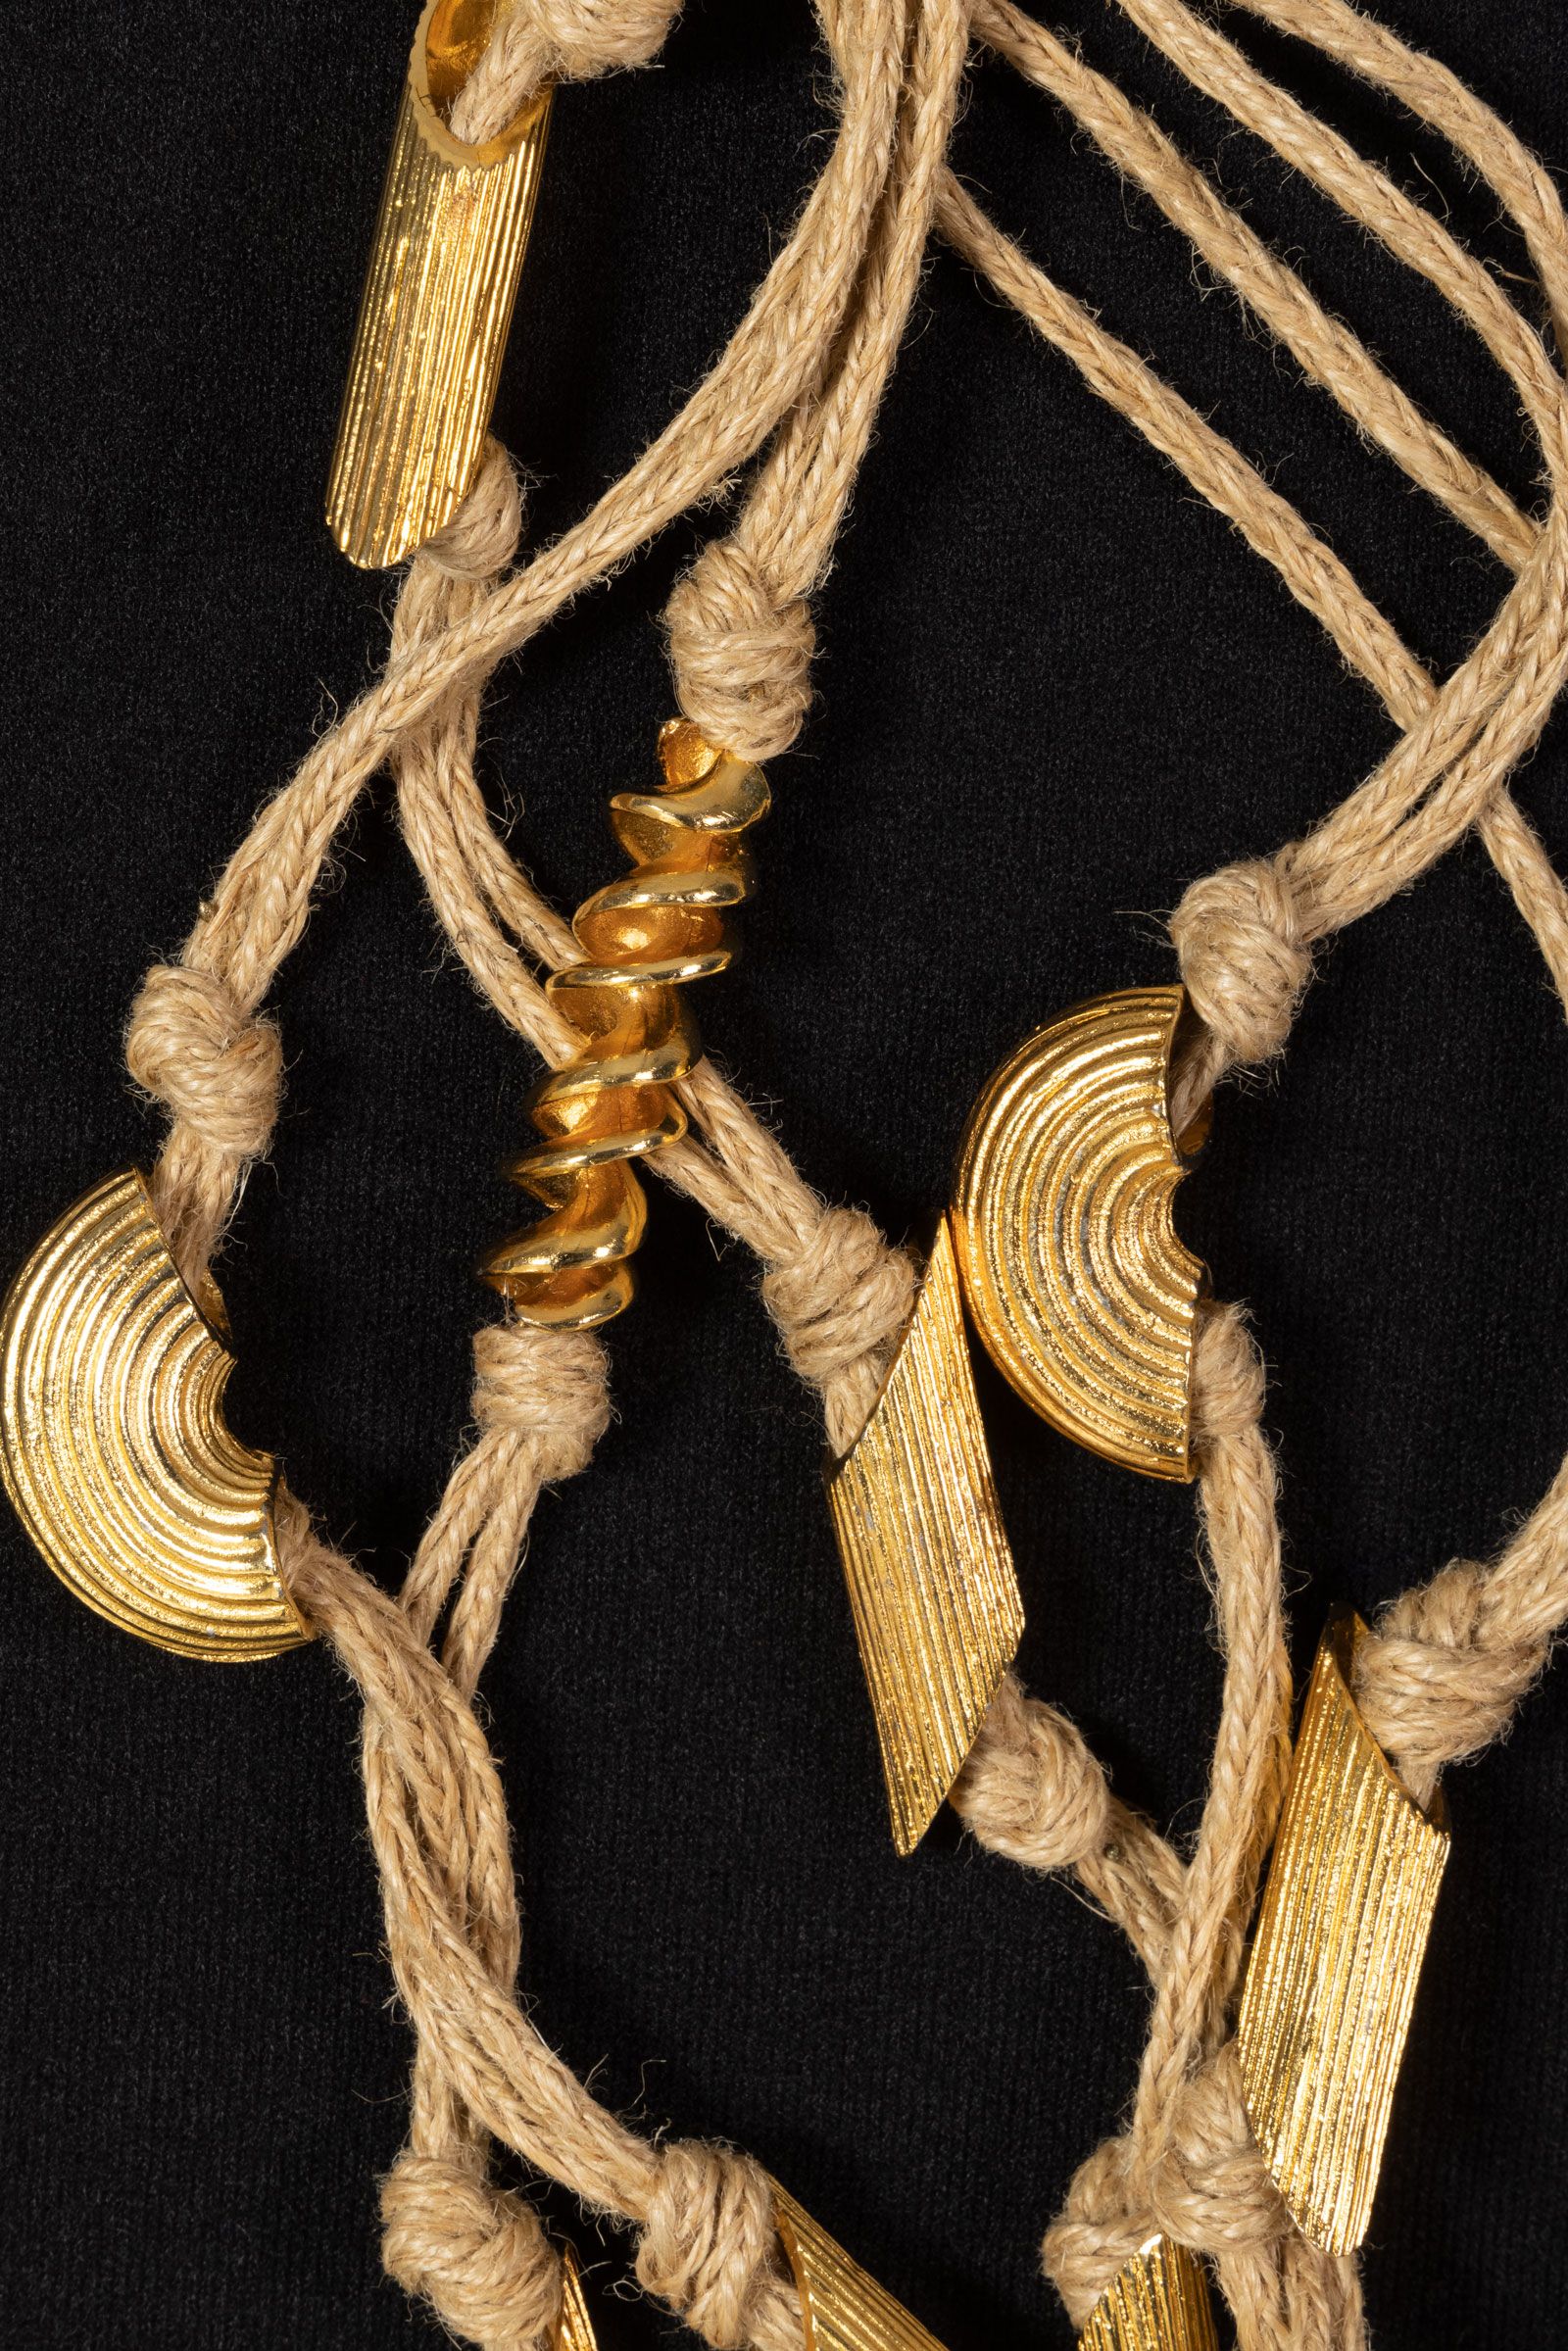 Pasta-inspired detailing on a necklace designed by Fendi circa-1980s.